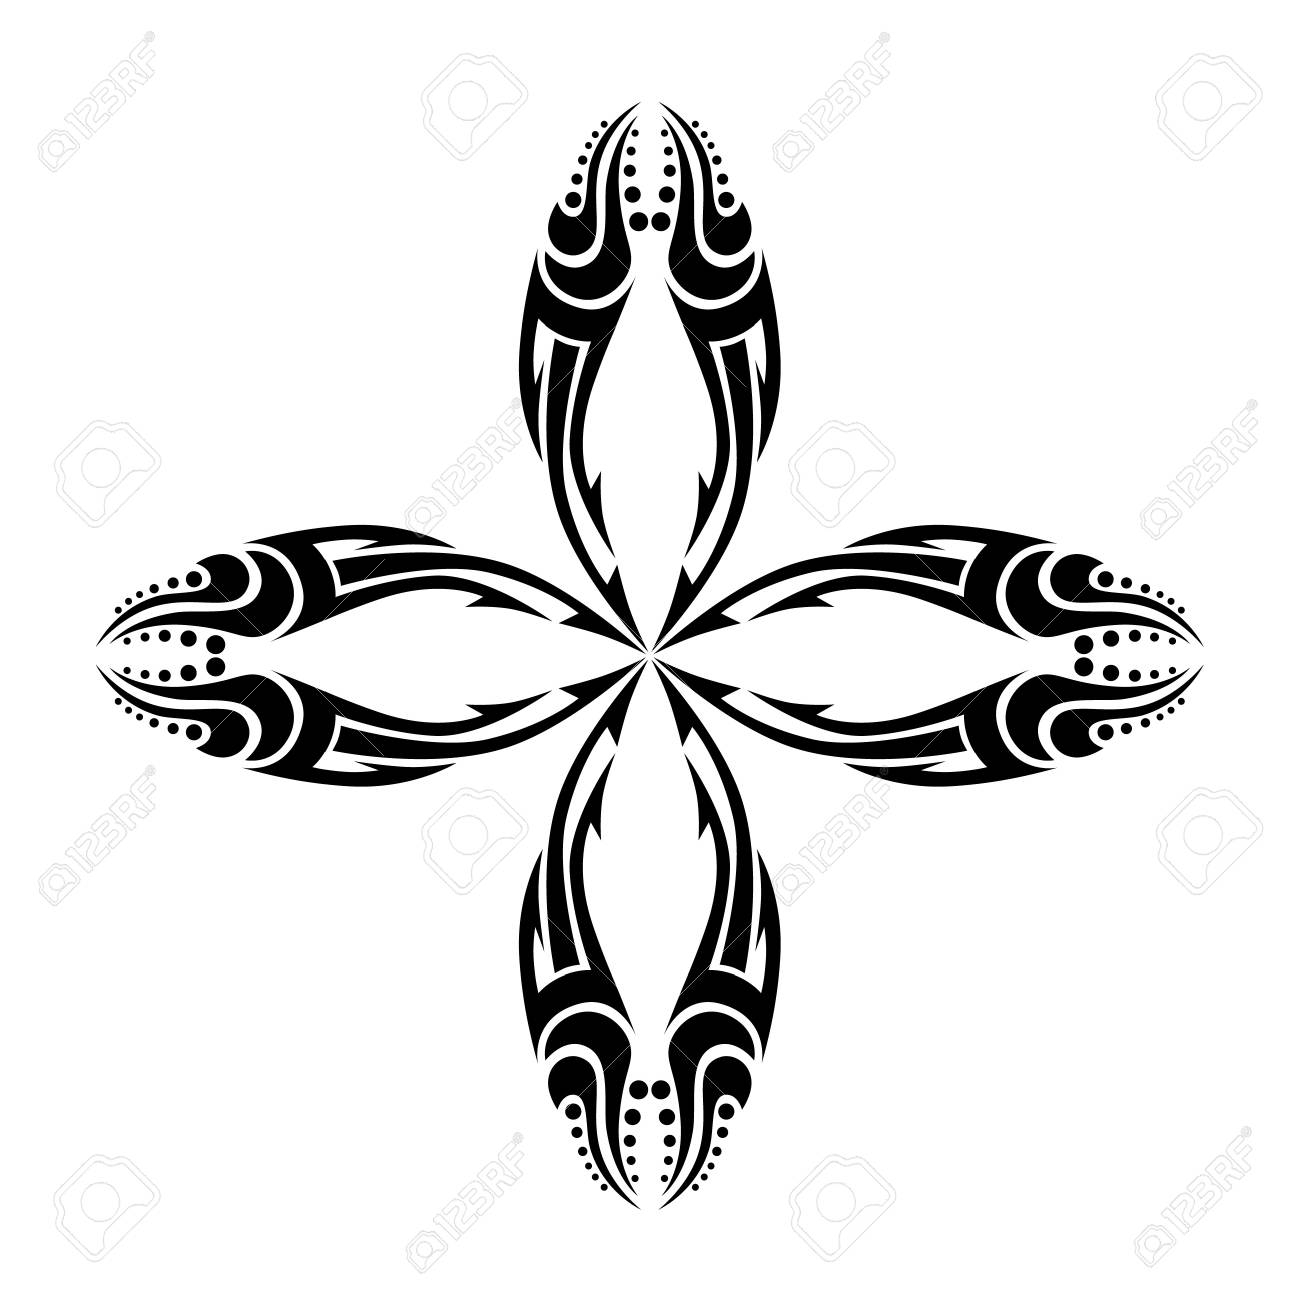 Tattoo Tribal Cross Designs Vector Sketch Of A Tattoo Art Tribal within measurements 1300 X 1300